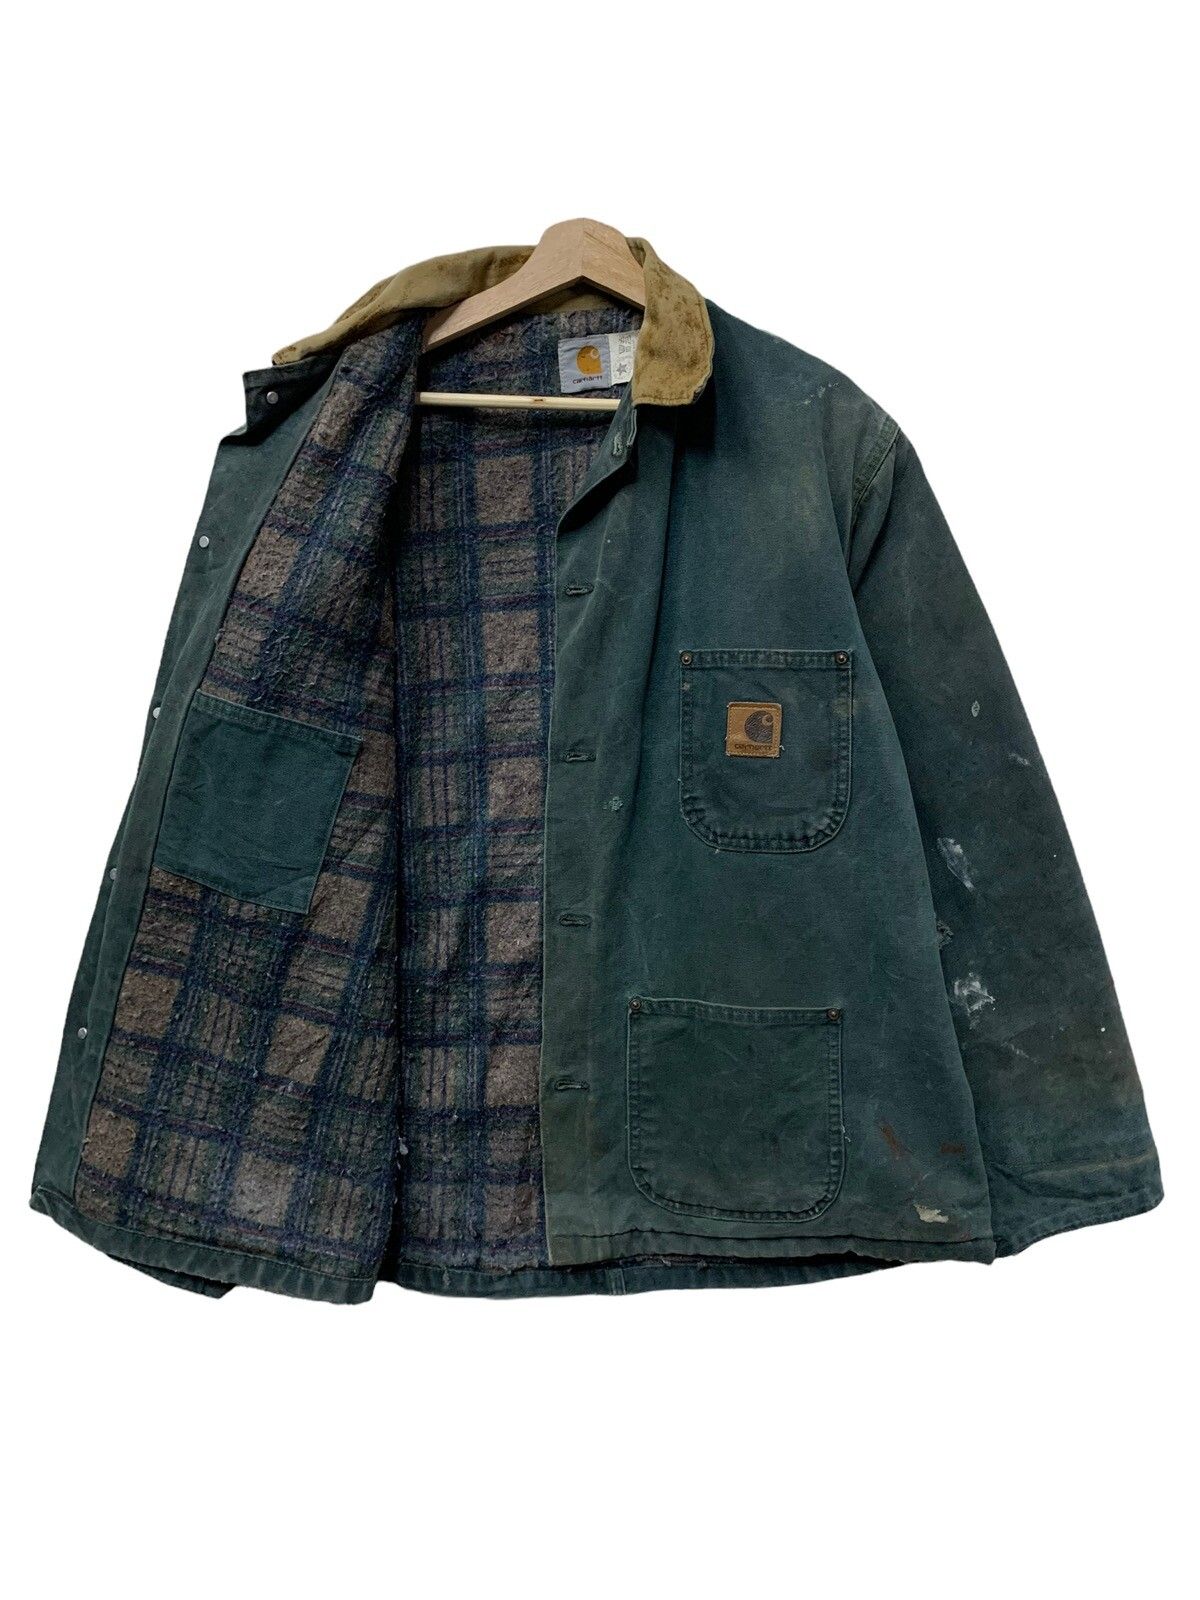 🔥DISTRESSED CARHARTT WORKERS CHORE JACKETS - 1